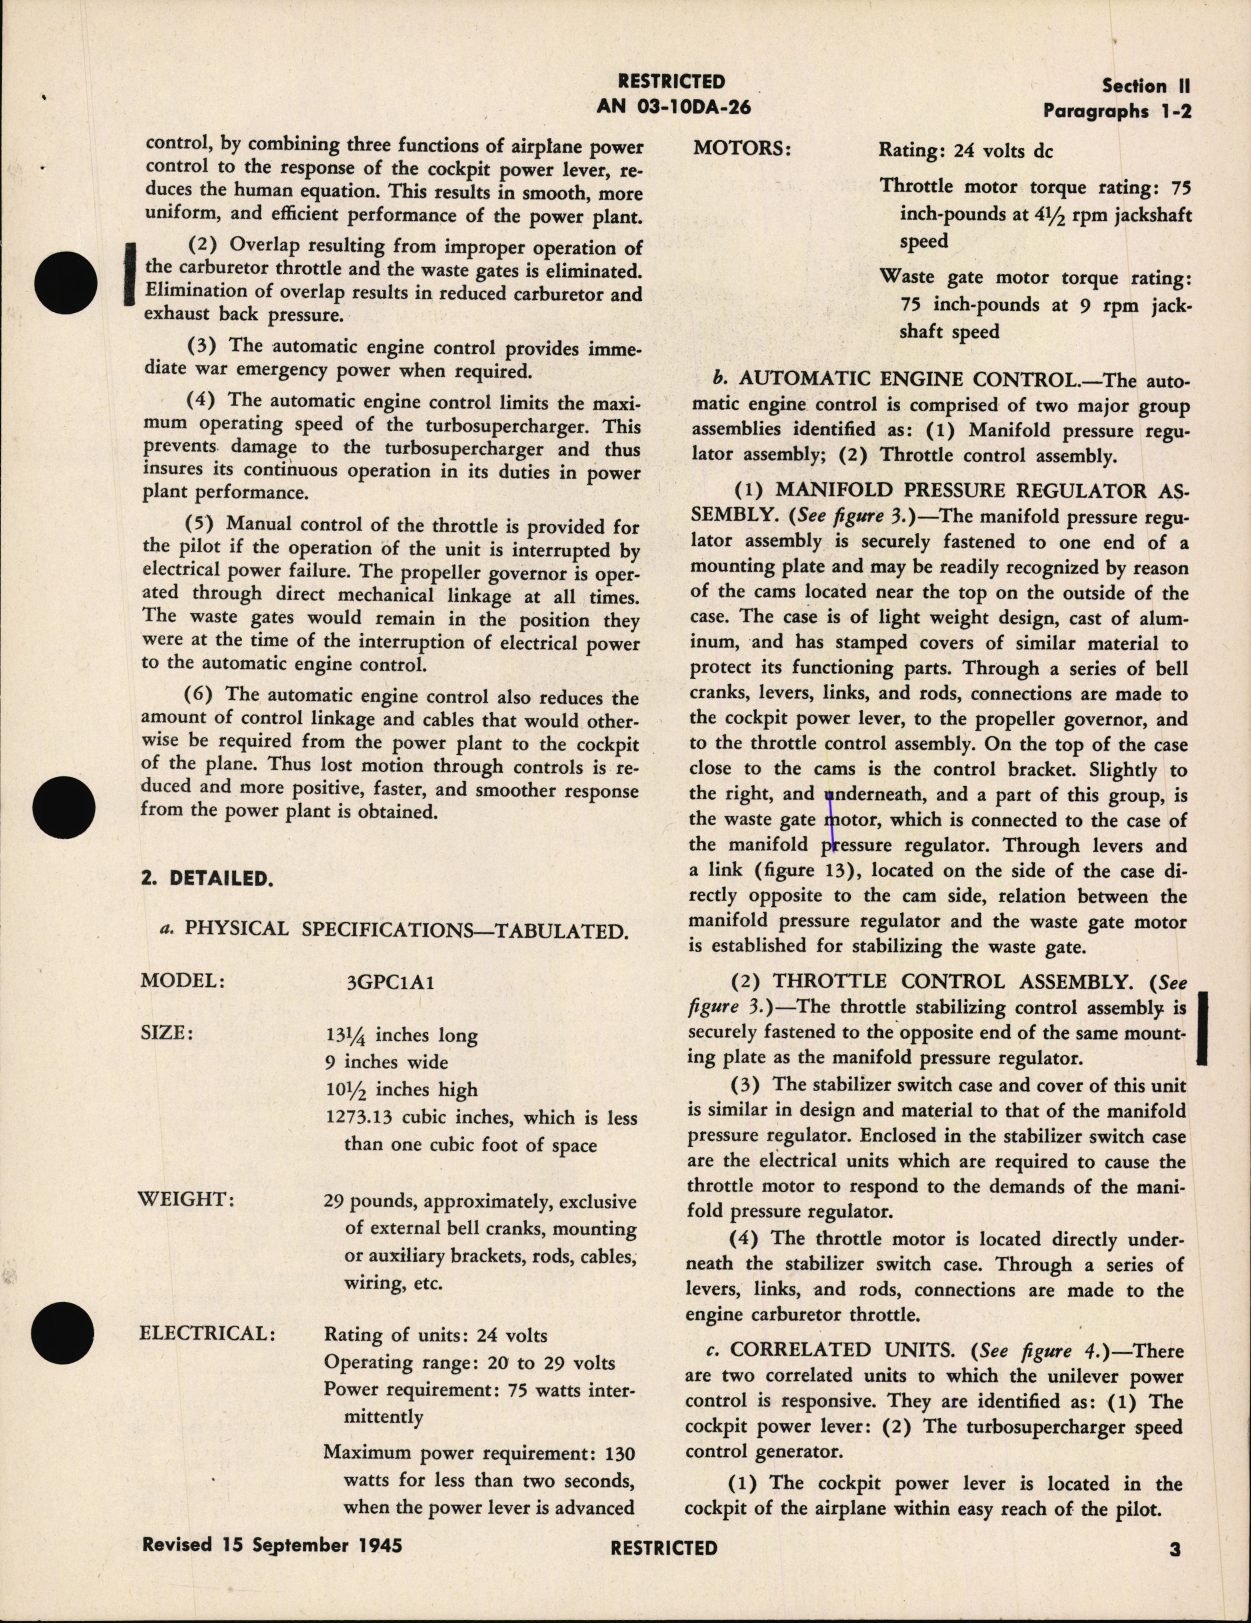 Sample page 7 from AirCorps Library document: Operation, Service, & Overhaul Instructions with Parts Catalog for Automatic Engine Control Type C-1 Model 3GPC1A1